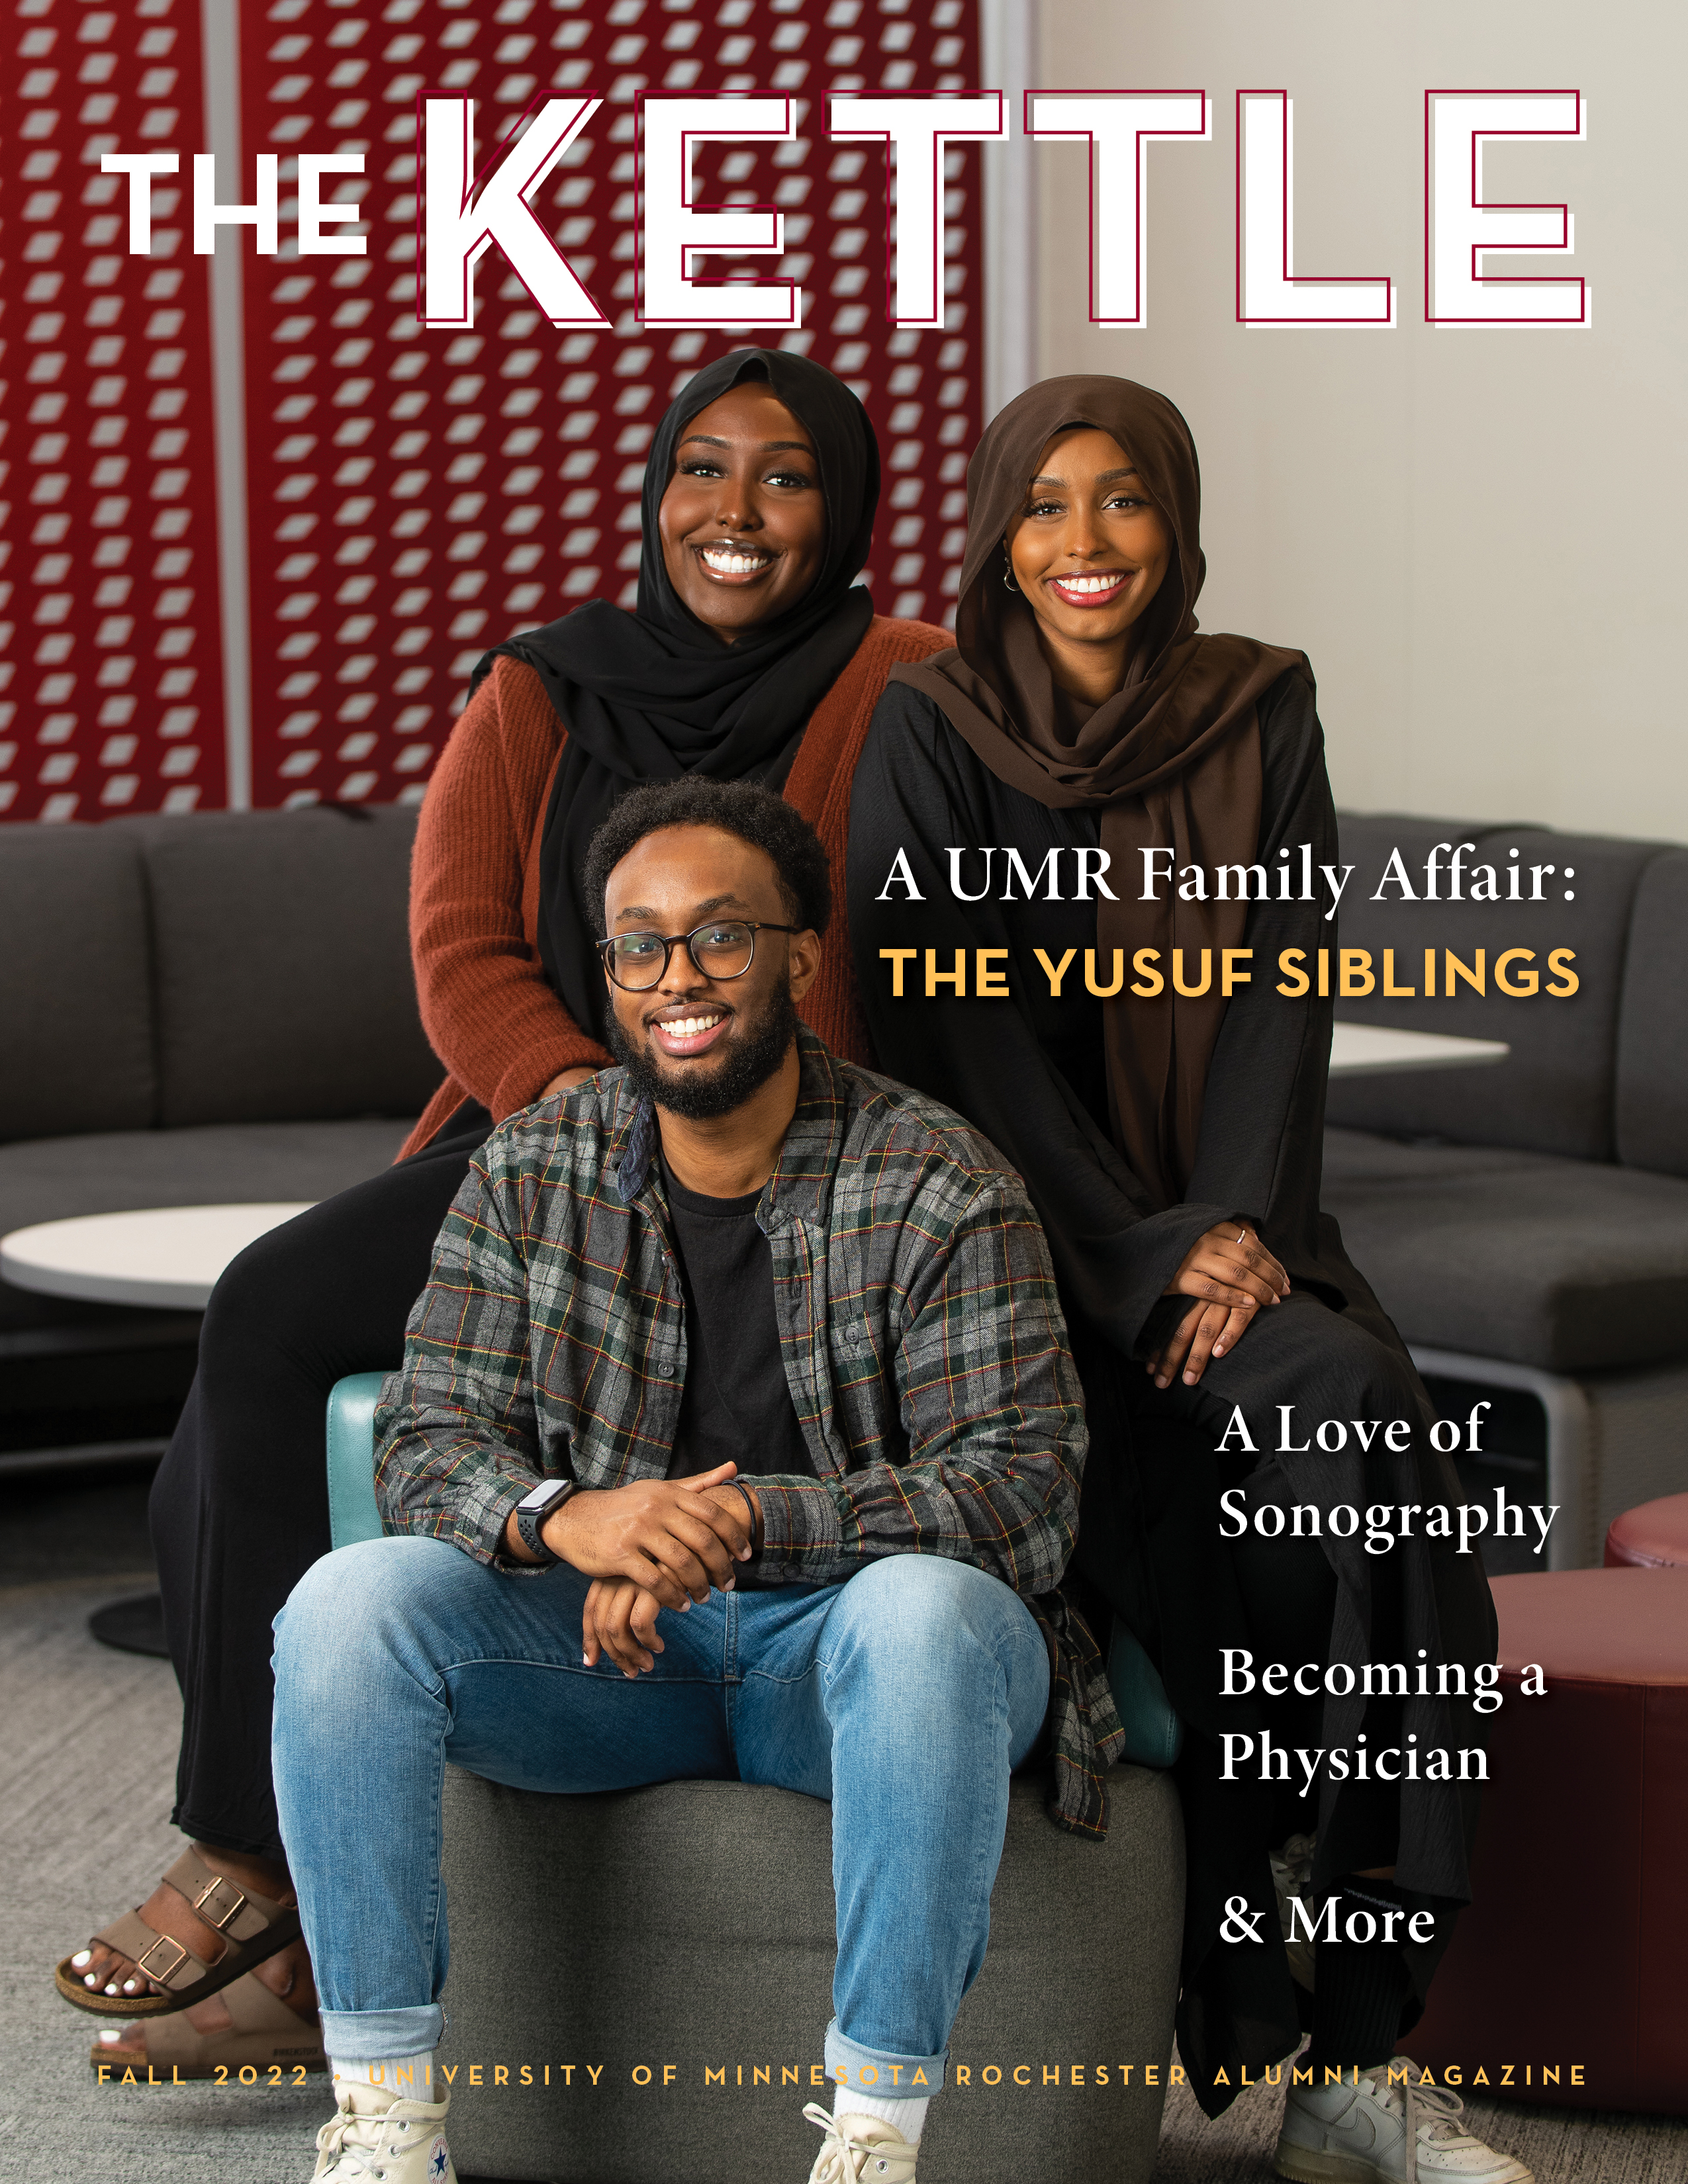 The Yusuf Siblings smiling on the magazine cover of The Kettle.